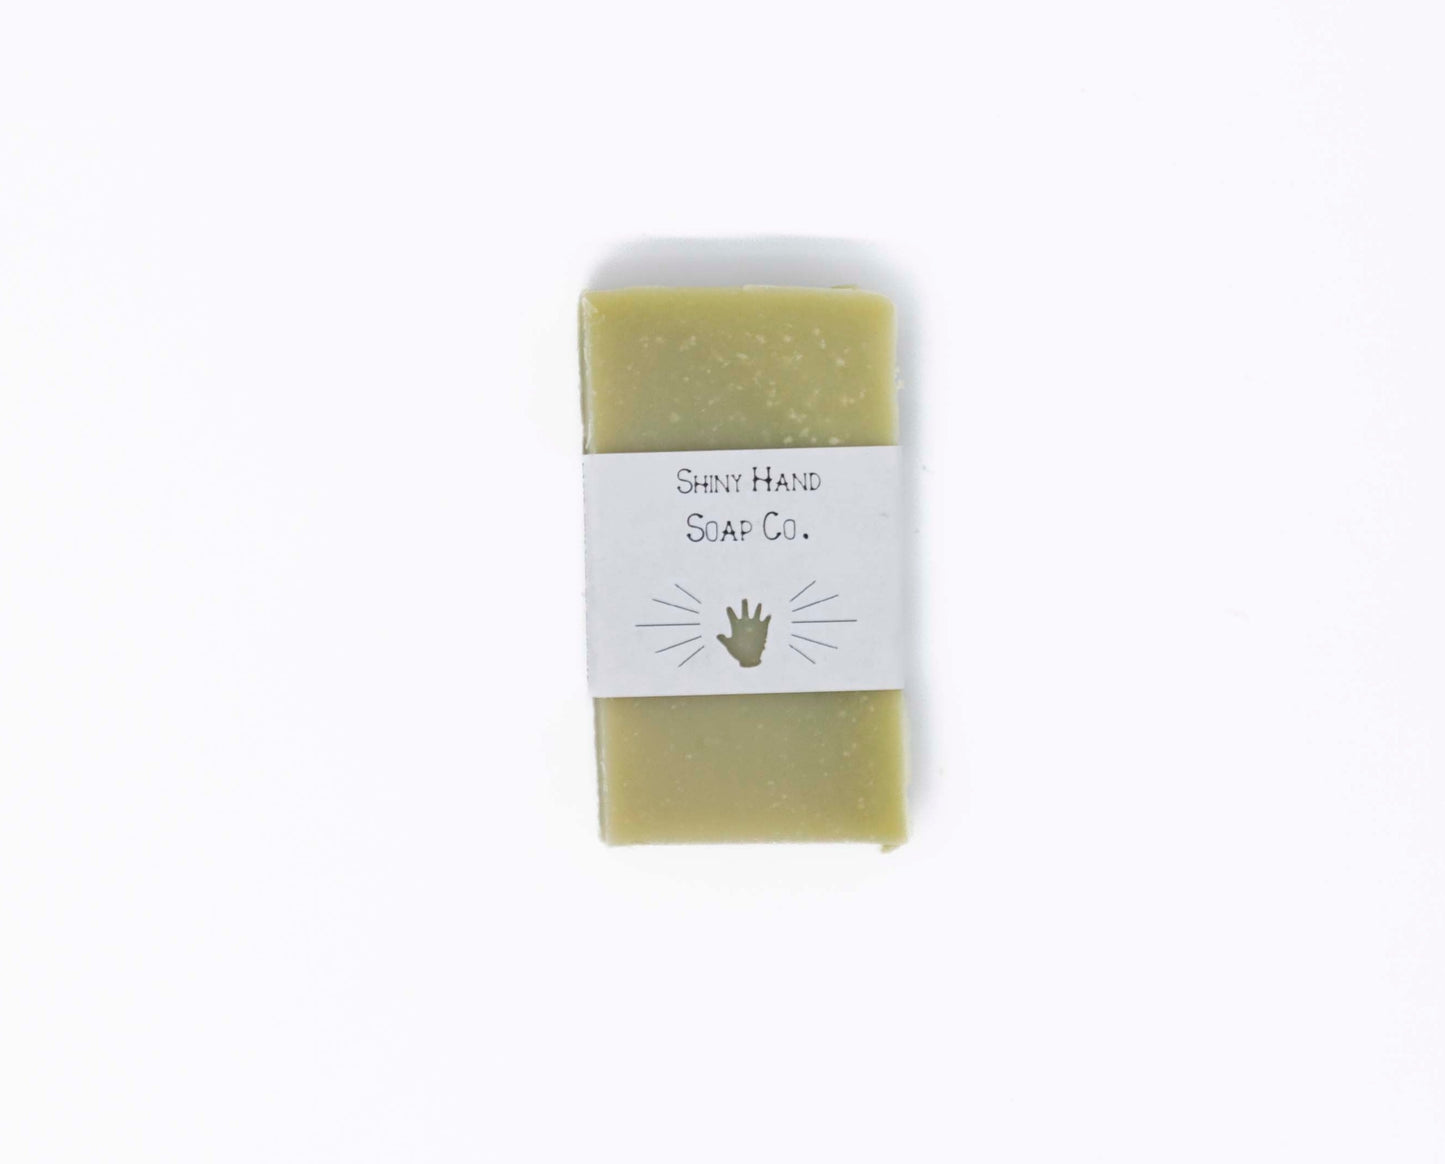 One bright fresh vibrant green bergamot pine miniature soap bar sits on a clean white background with a white paper wrapper that has a hand shape cut out of it.